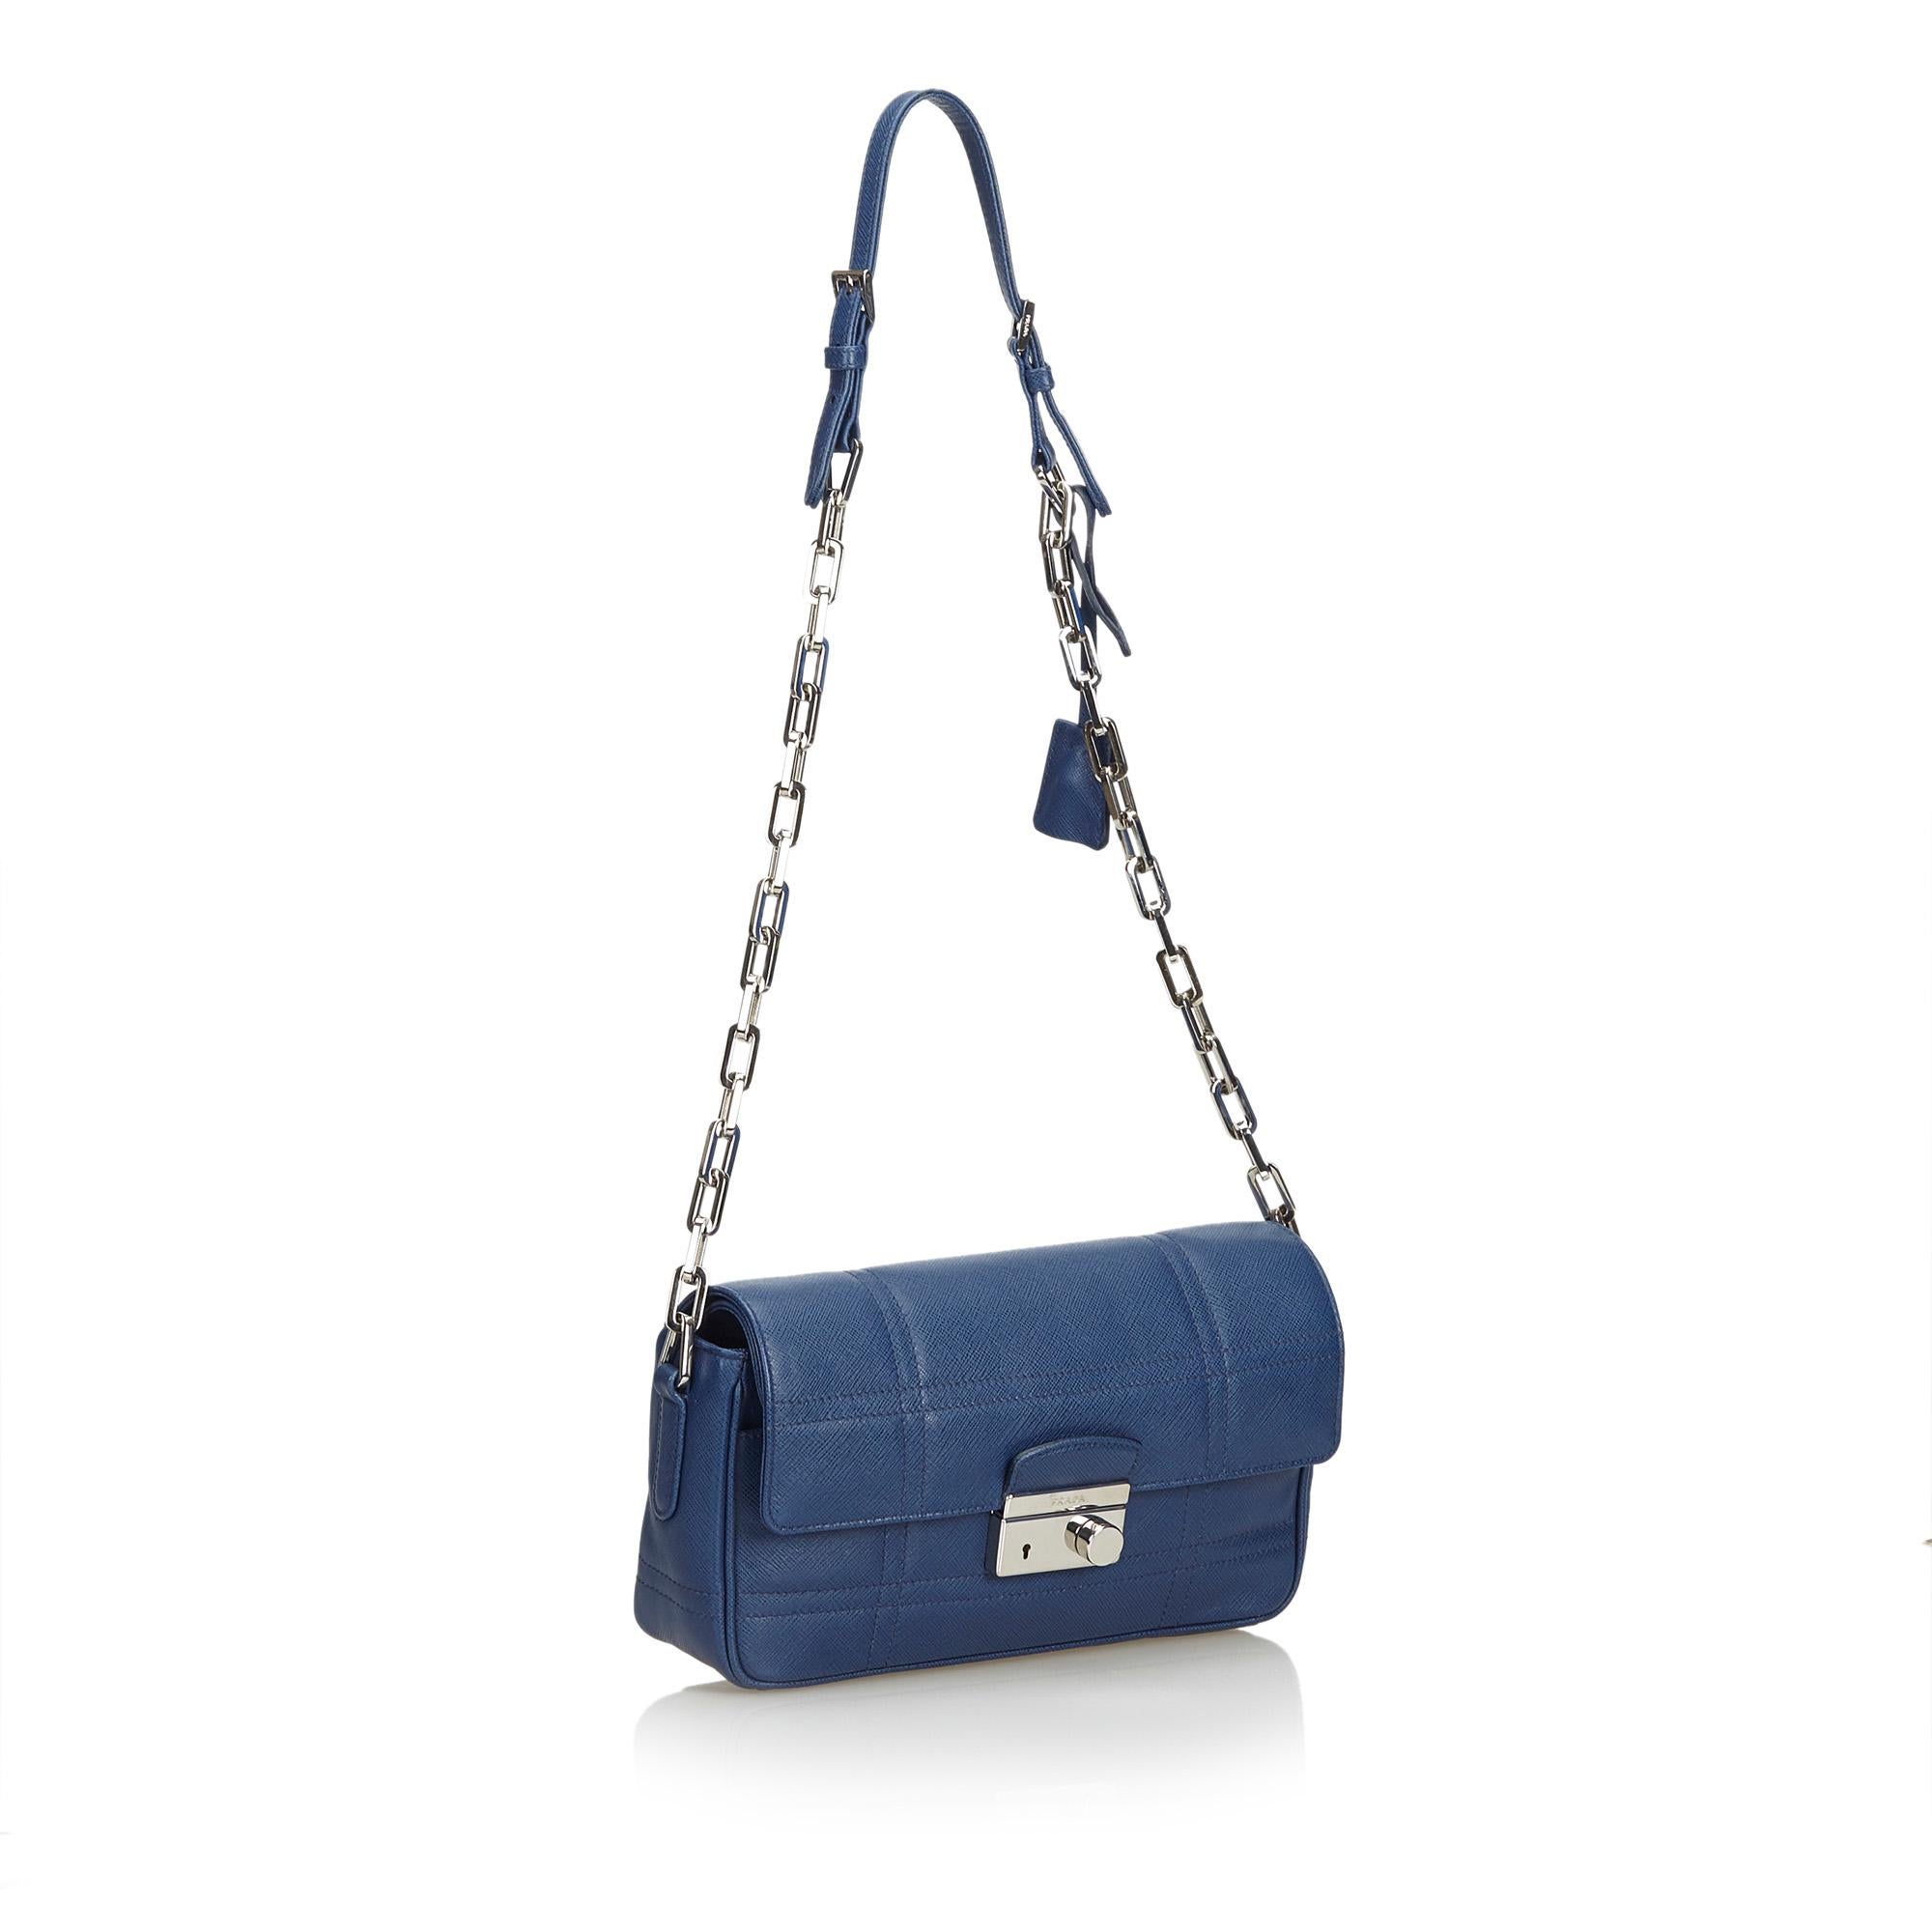 This shoulder features a leather body, a silver-tone chain strap, a front flap with push lock closure, and an interior zip pocket. It carries as AB condition rating.

Inclusions: 
Authenticity Card

Dimensions:
Length: 16.00 cm
Width: 22.00